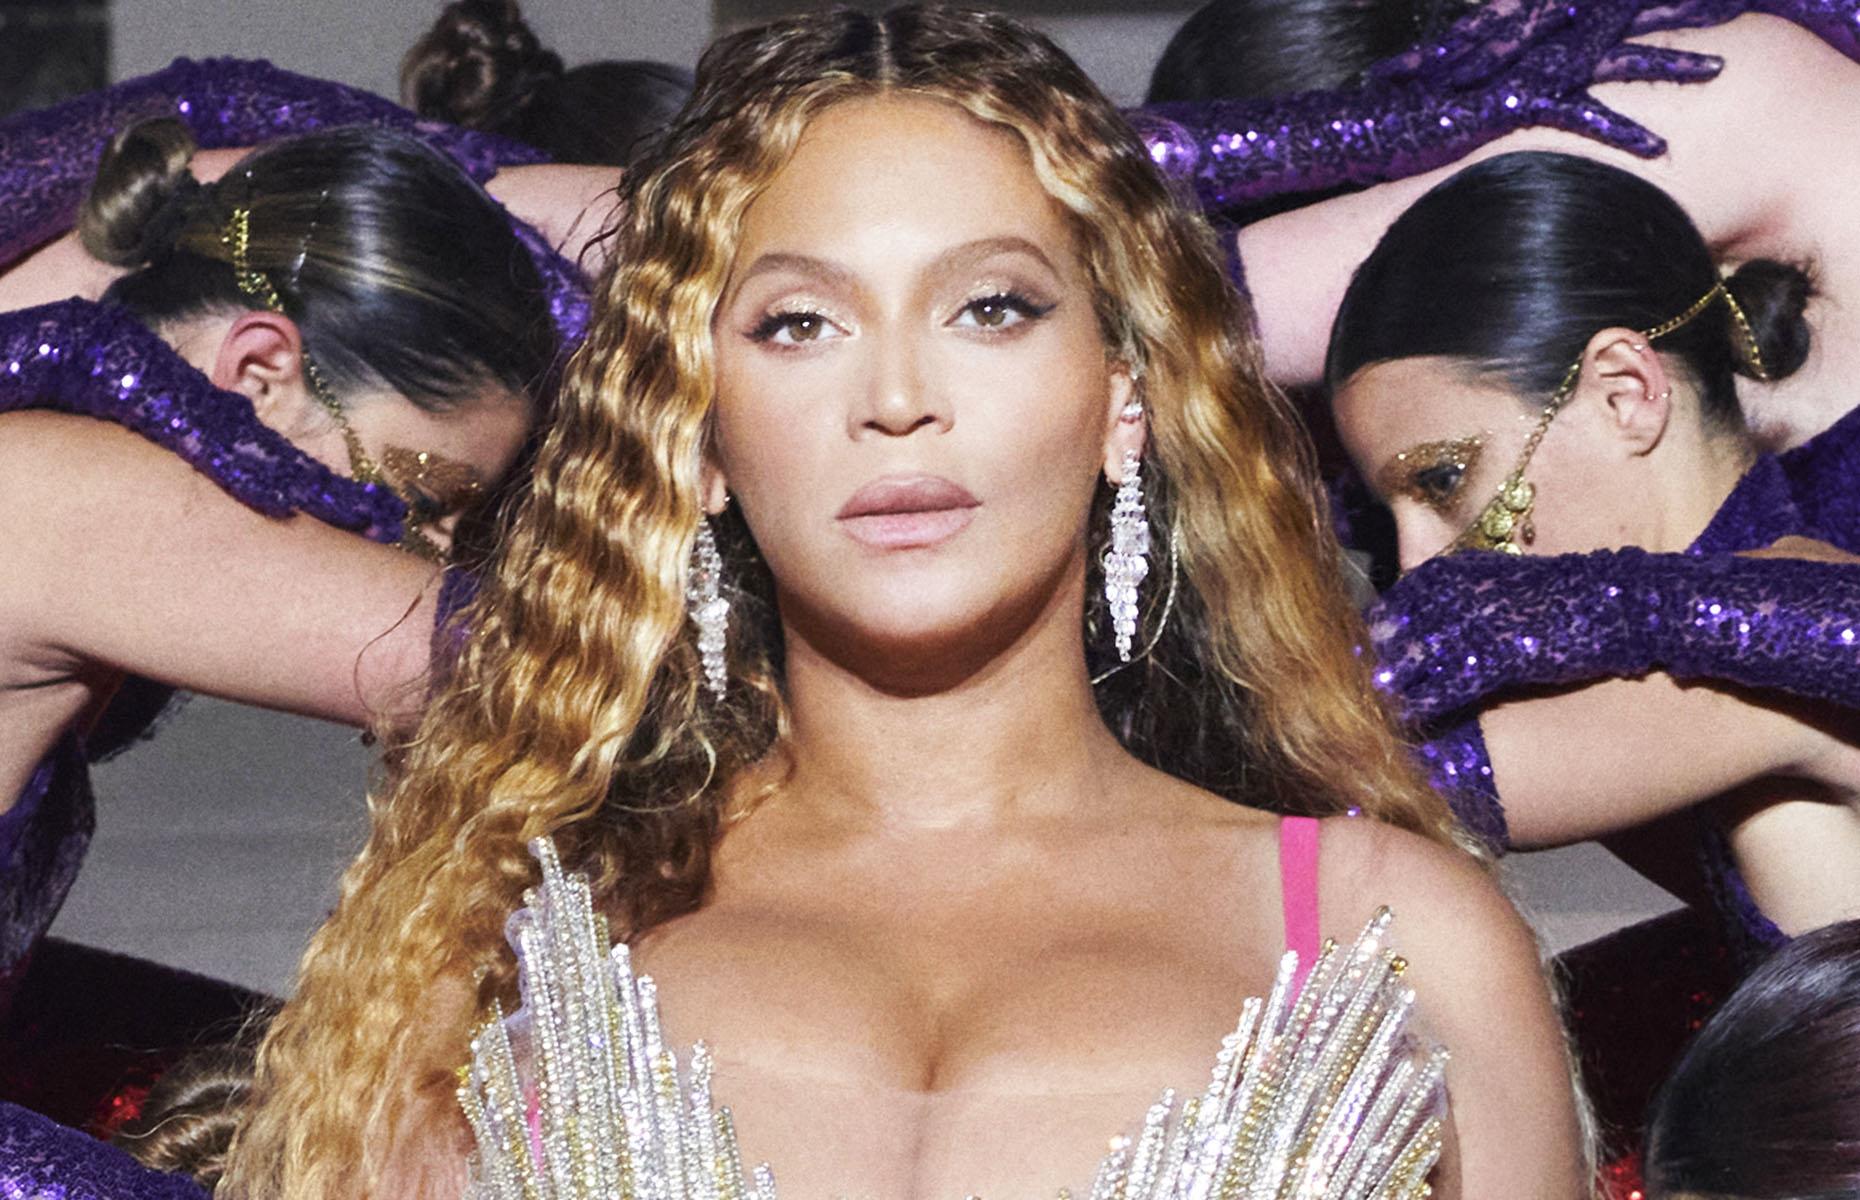 <p>Beyoncé loves to splash her cash on flashy bling. In fact, during her aforementioned private concert at Dubai's Atlantis The Royal hotel, she wore several pieces of extravagant jewelry by luxury designer Lorraine Schwartz, valued at a jaw-dropping $7.5 million.</p>  <p>The star’s controversial performance included three wardrobe changes, and throughout the night she donned a pair of 100-carat emerald earrings surrounded by 60 carats of dazzling white diamonds; a 30-carat diamond ring; 50-carat pear-shaped diamond earrings; and finally, a pair of diamond pyramid earrings (pictured) that totaled more than 60 carats.</p>